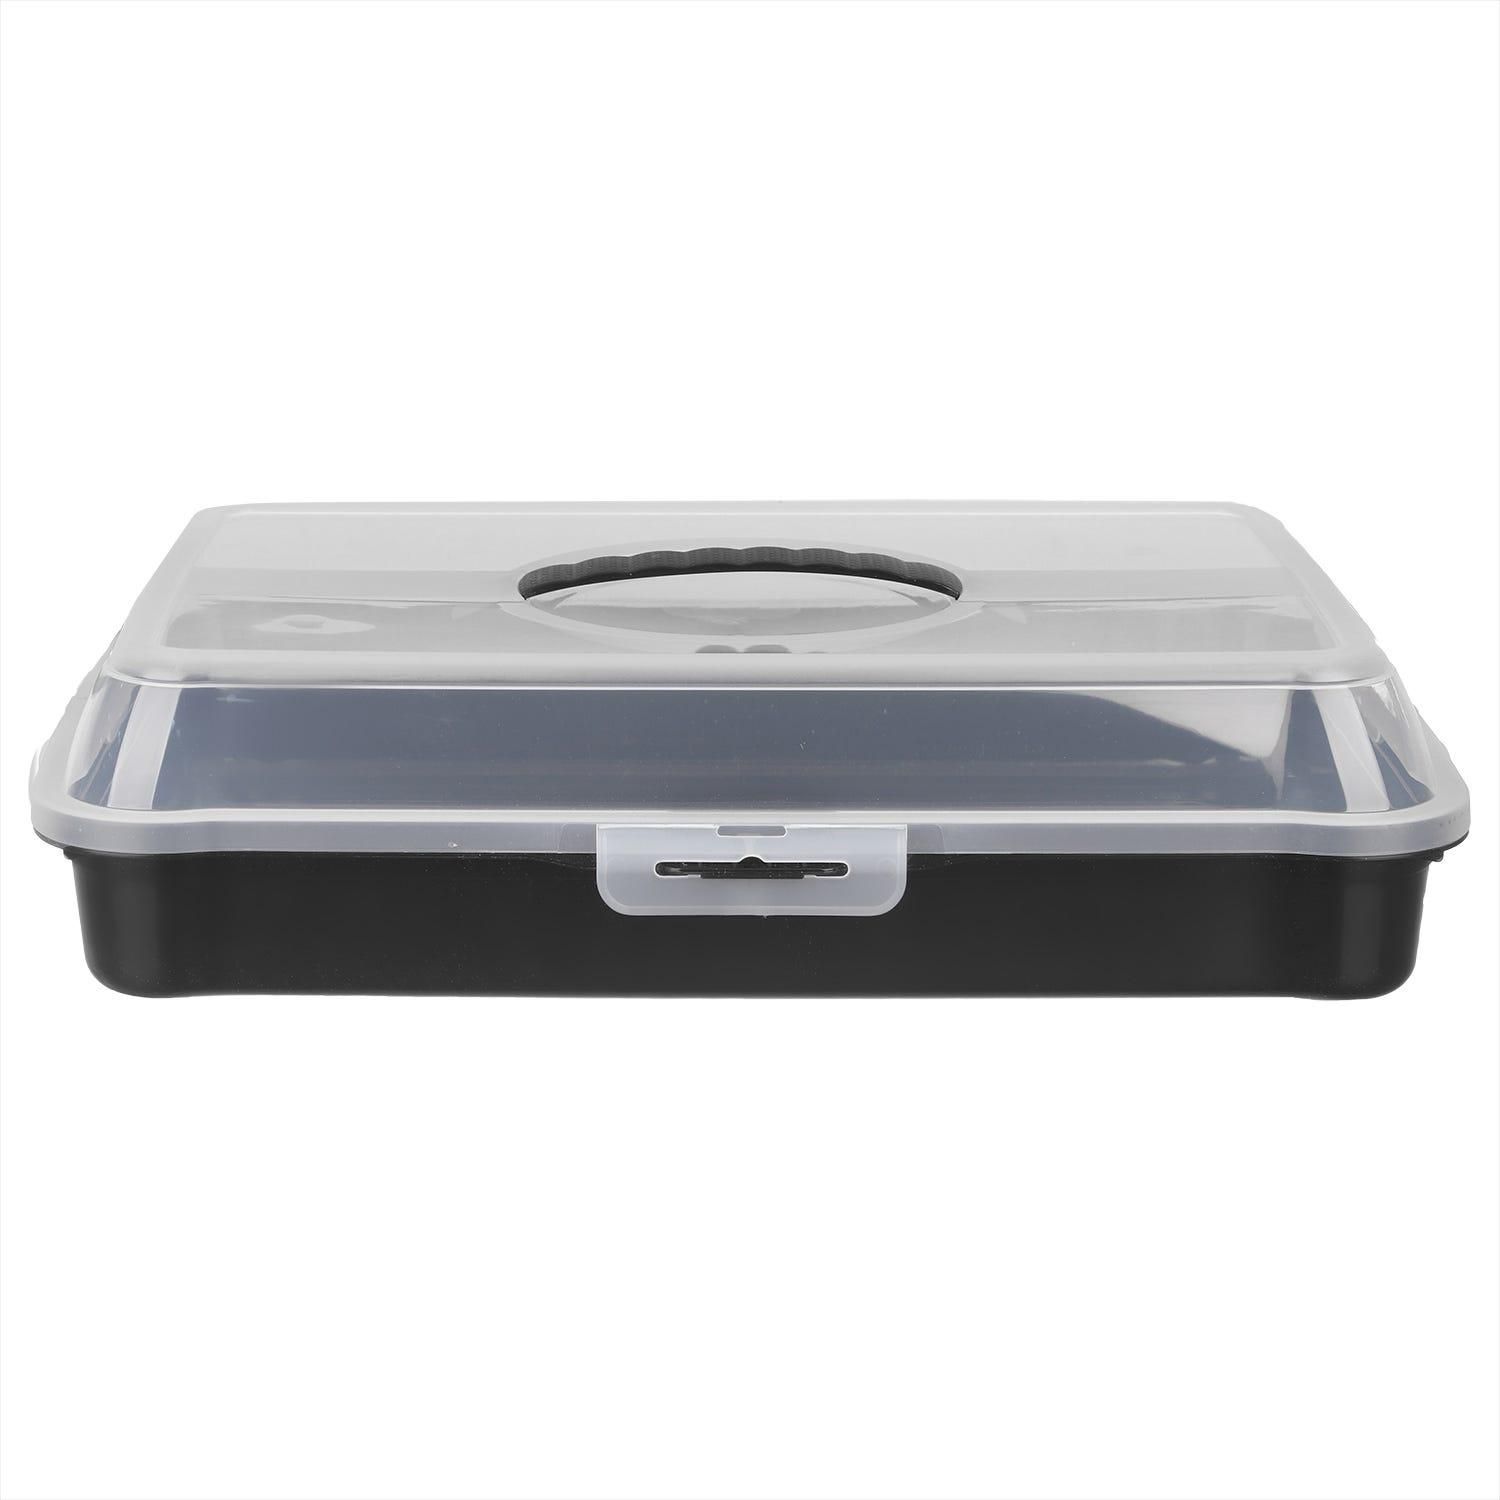 Get Elite Square Plastic Meals Box, 45×30 cm with best offers | Raneen.com